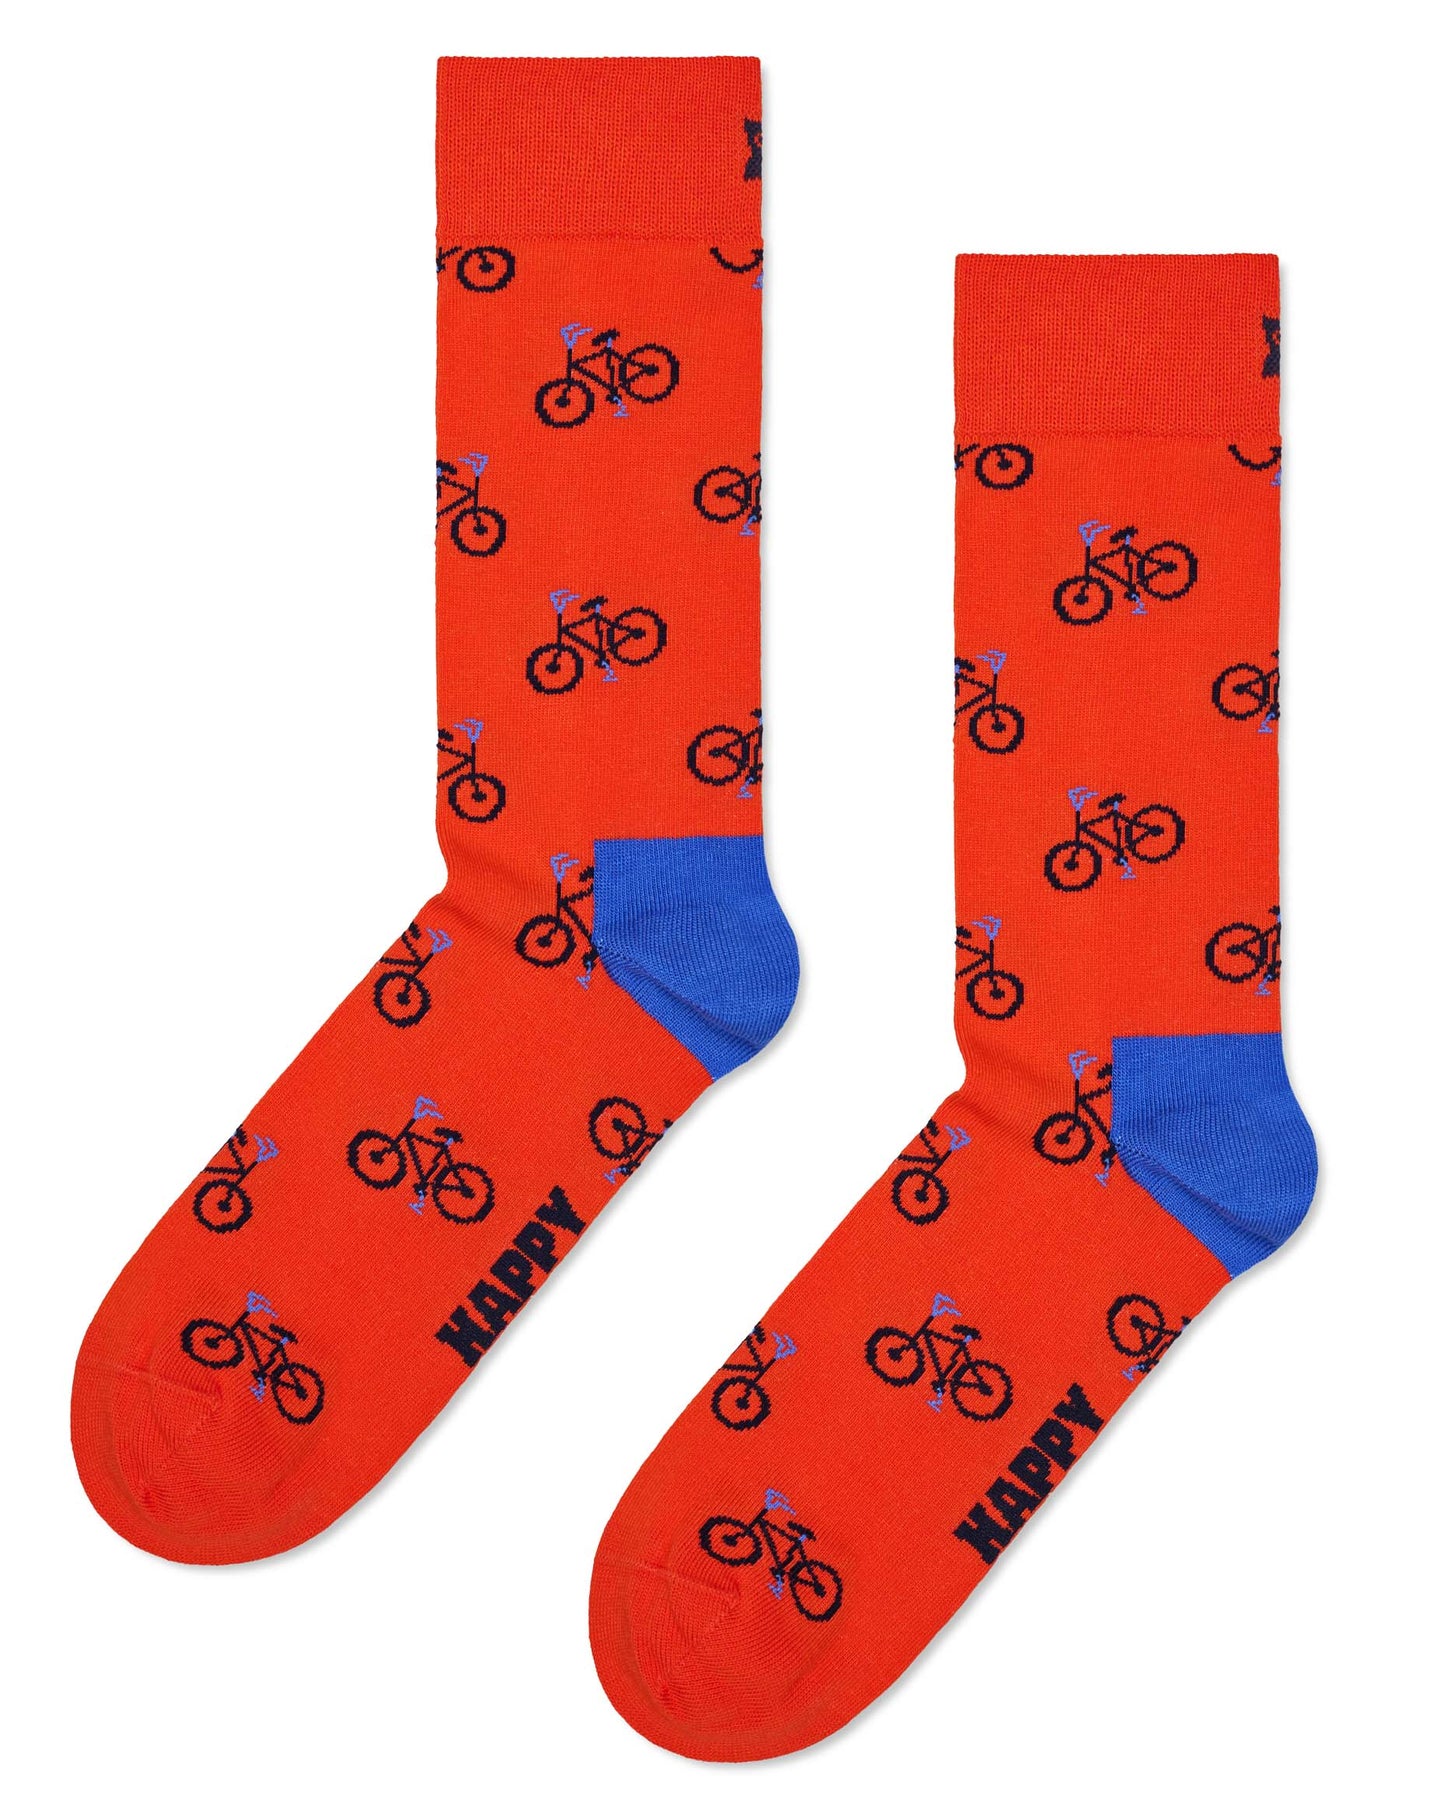 Happy Socks P000049 Bike Sock - Red cotton crew length ankle socks with an all over pattern of bicycles in navy and blue and blue heel.